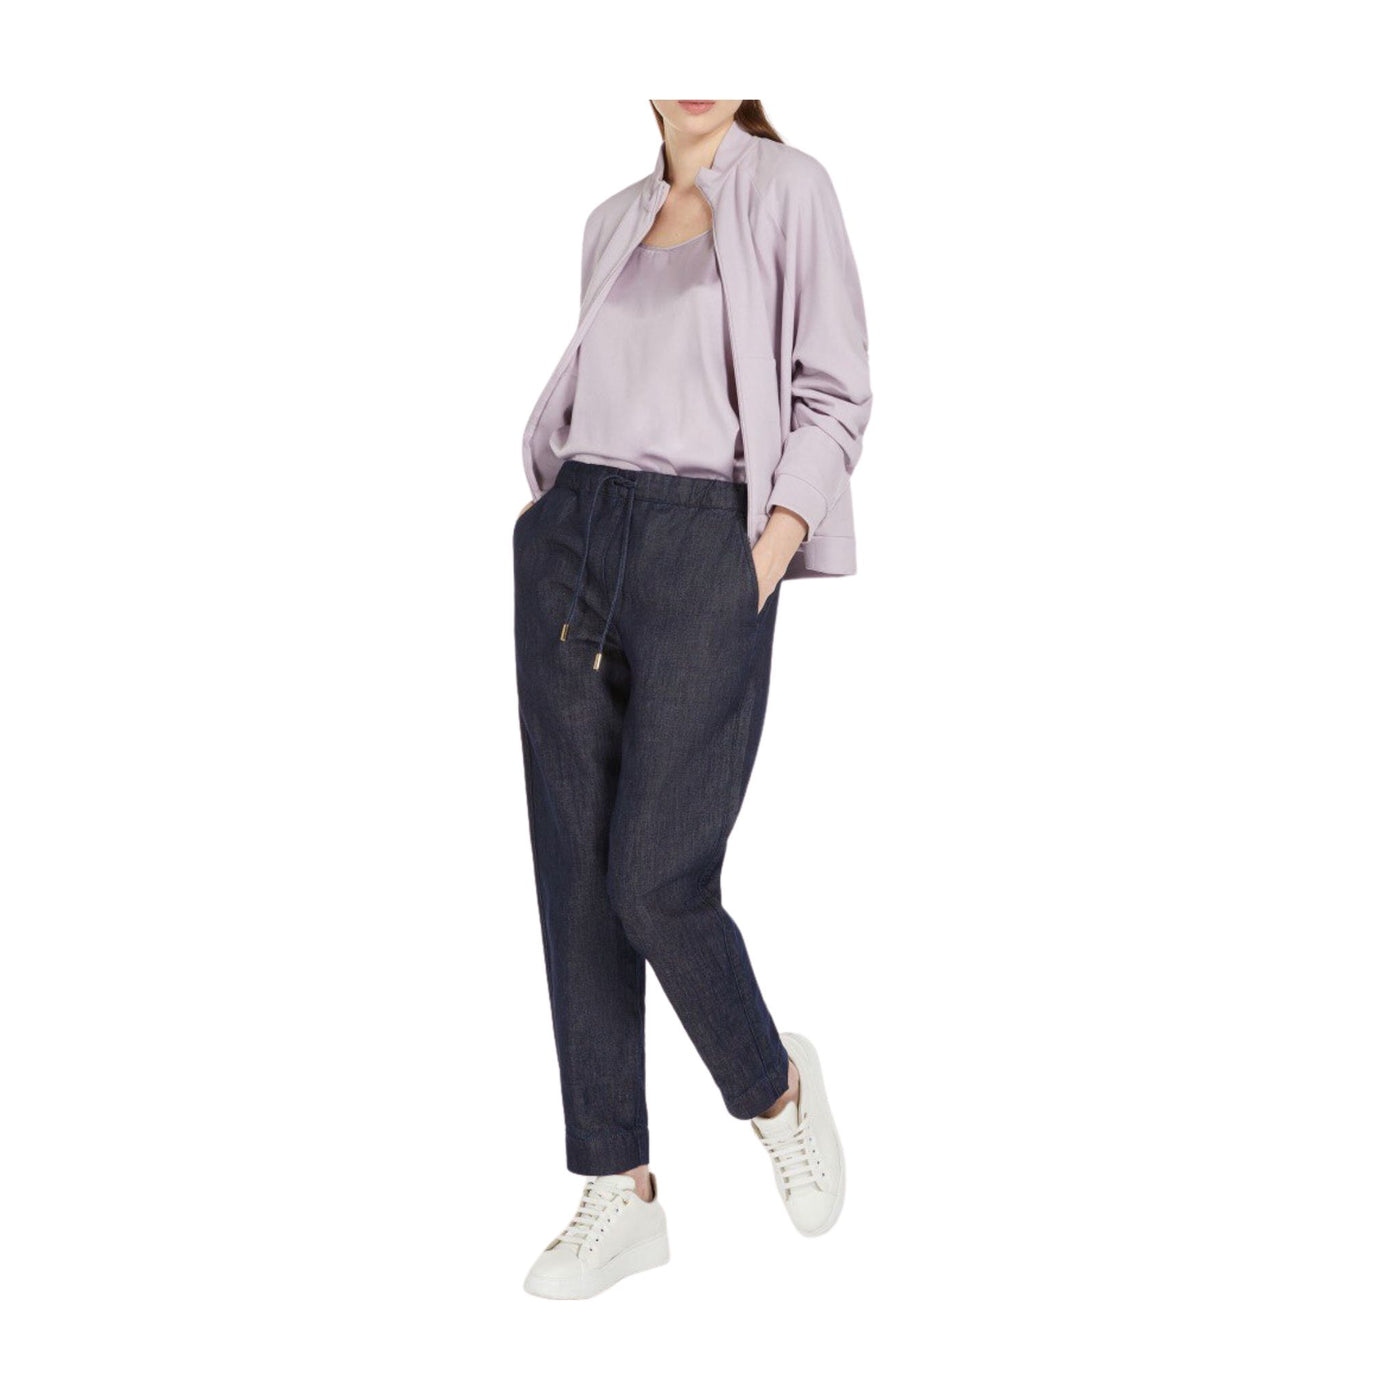 Women's denim trousers with drawstring